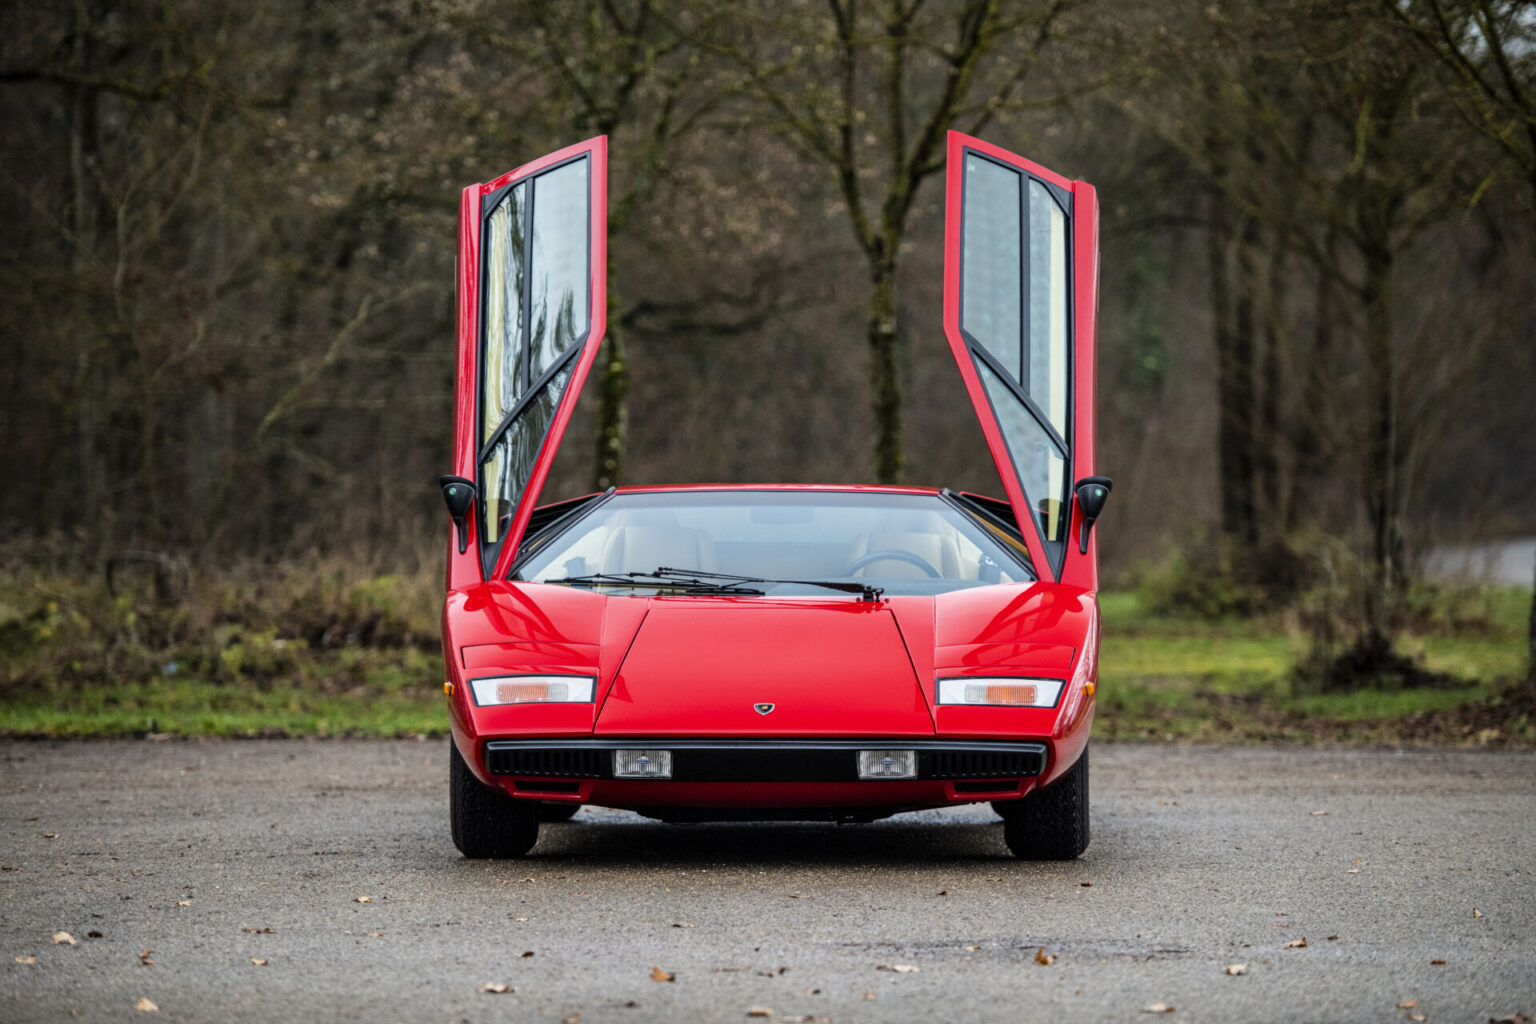 Rod Stewart’s 1977 Lamborghini Countach LP400, expected to sell for nearly £1 million, highlights an auction of 87 luxury cars, including a Bugatti Chiron and Ferrari Enzo.